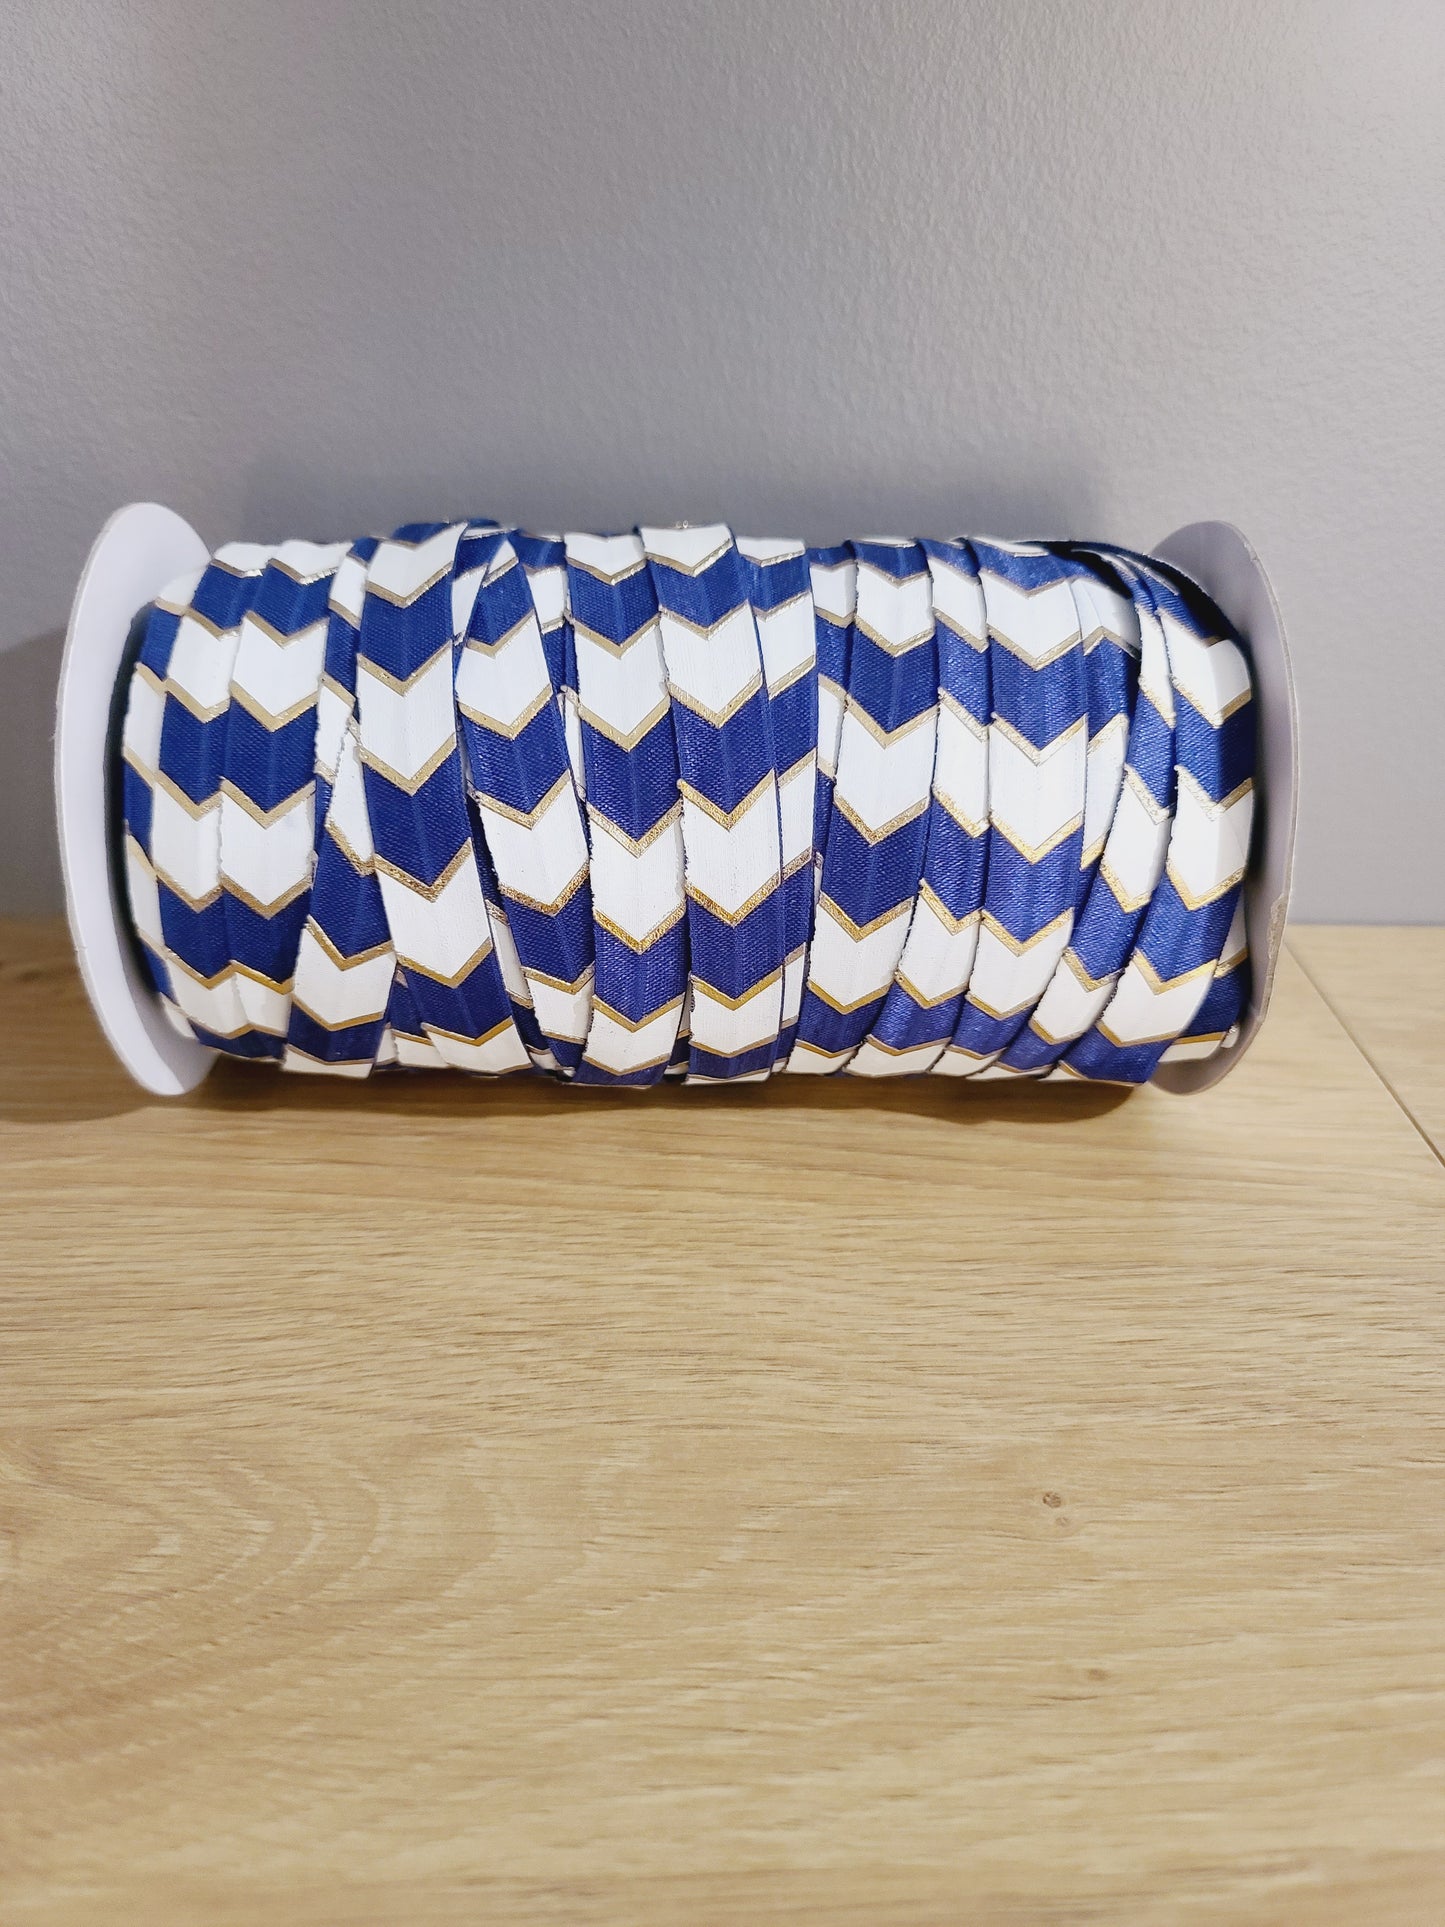 5/8" misc. FOIL (metallic) Fold Over Elastic (sold by the yard)